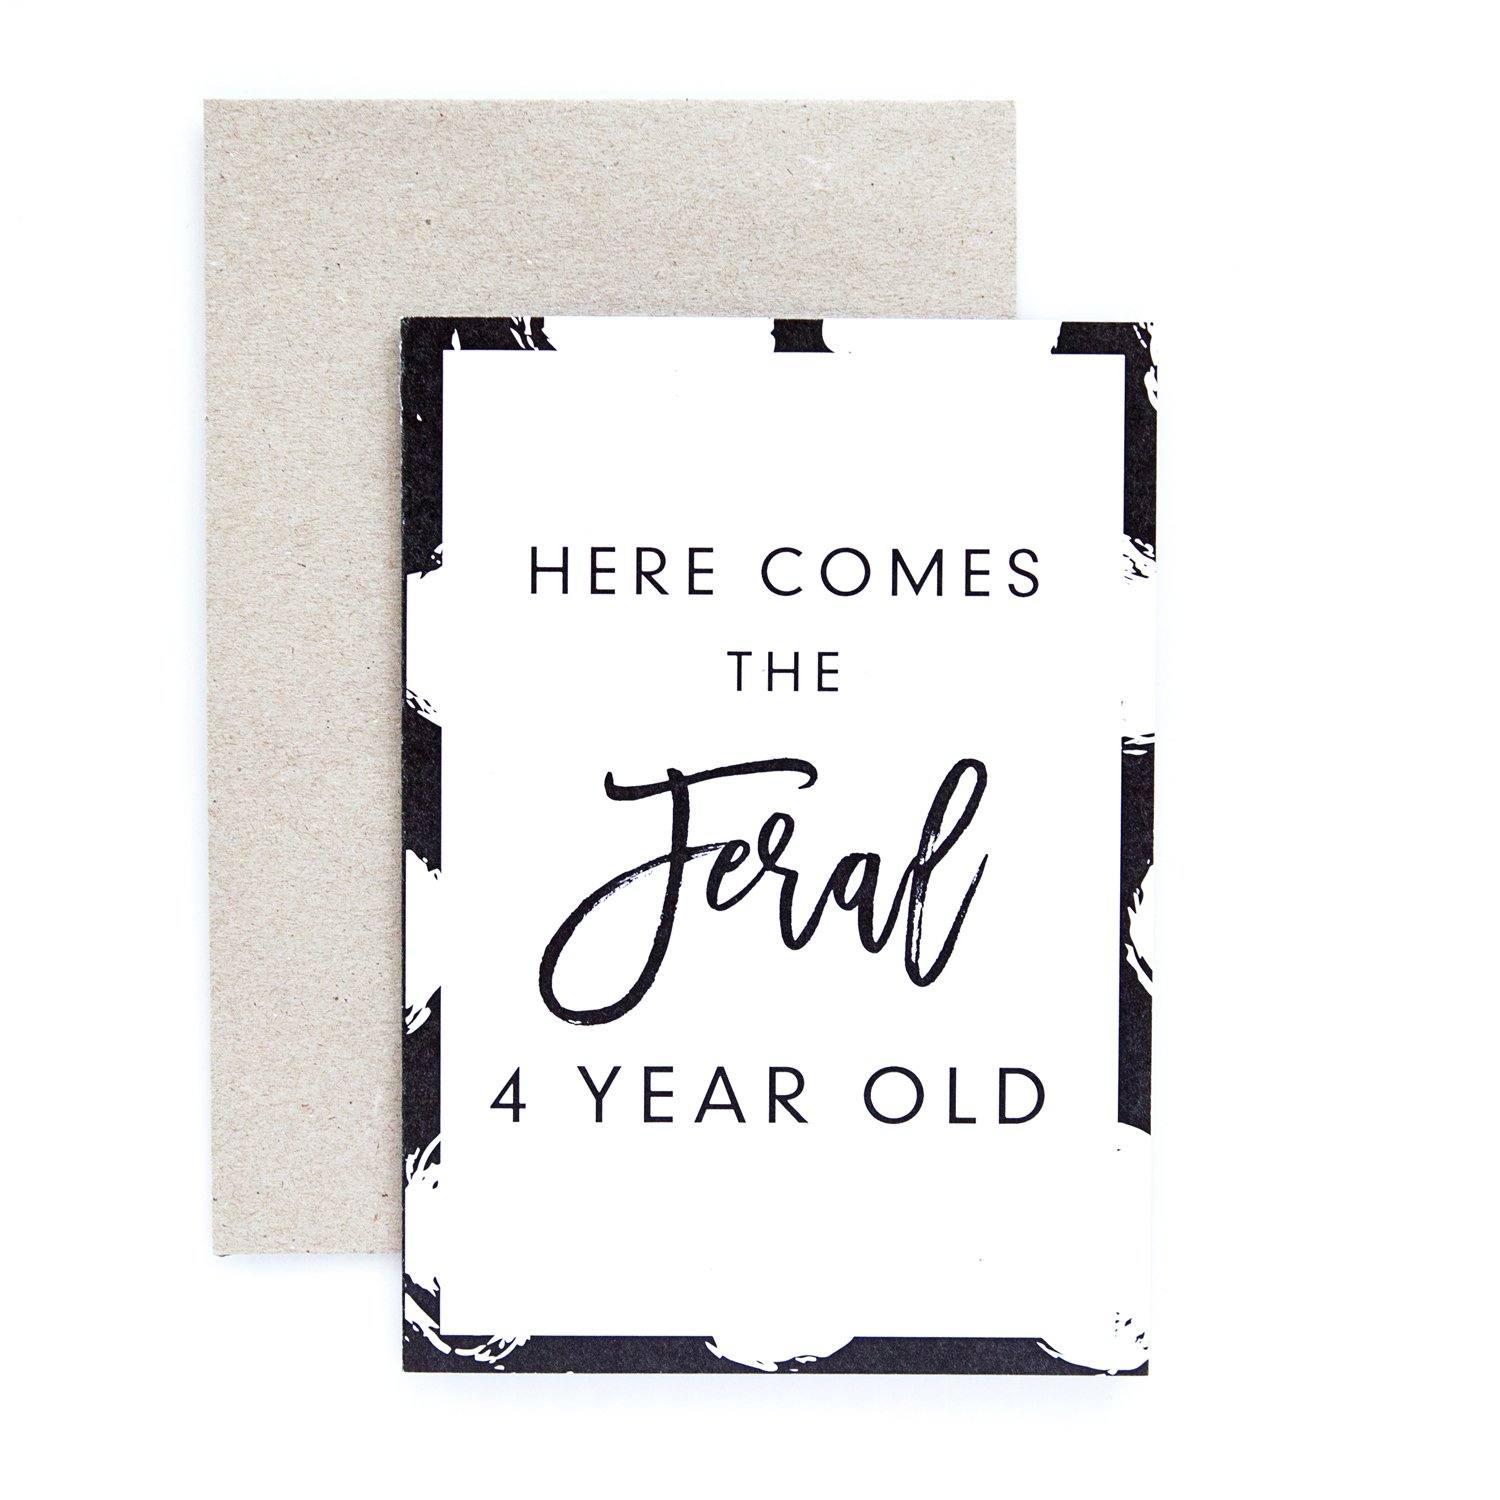 Feral 4 Year Old Greeting Card